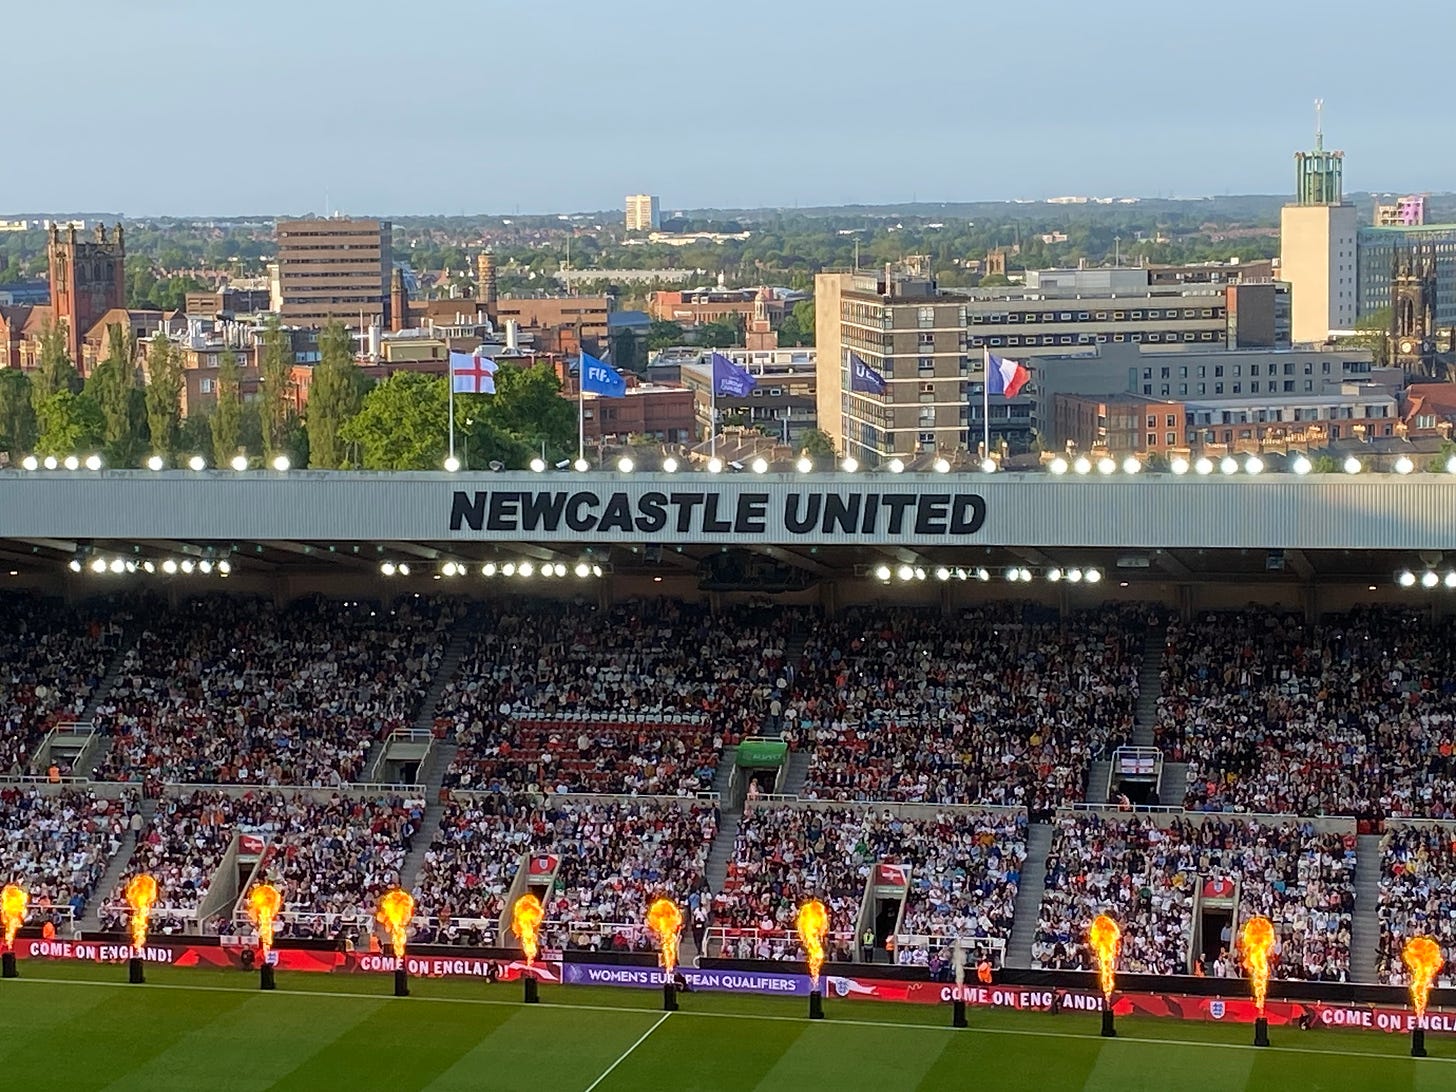 The view from the top of the Milburn Stand at Newcastle United. The pitch and some pyrotechnics in the foreground, the roof of the stand opposite and the view over the city in the sunlight behind that. 